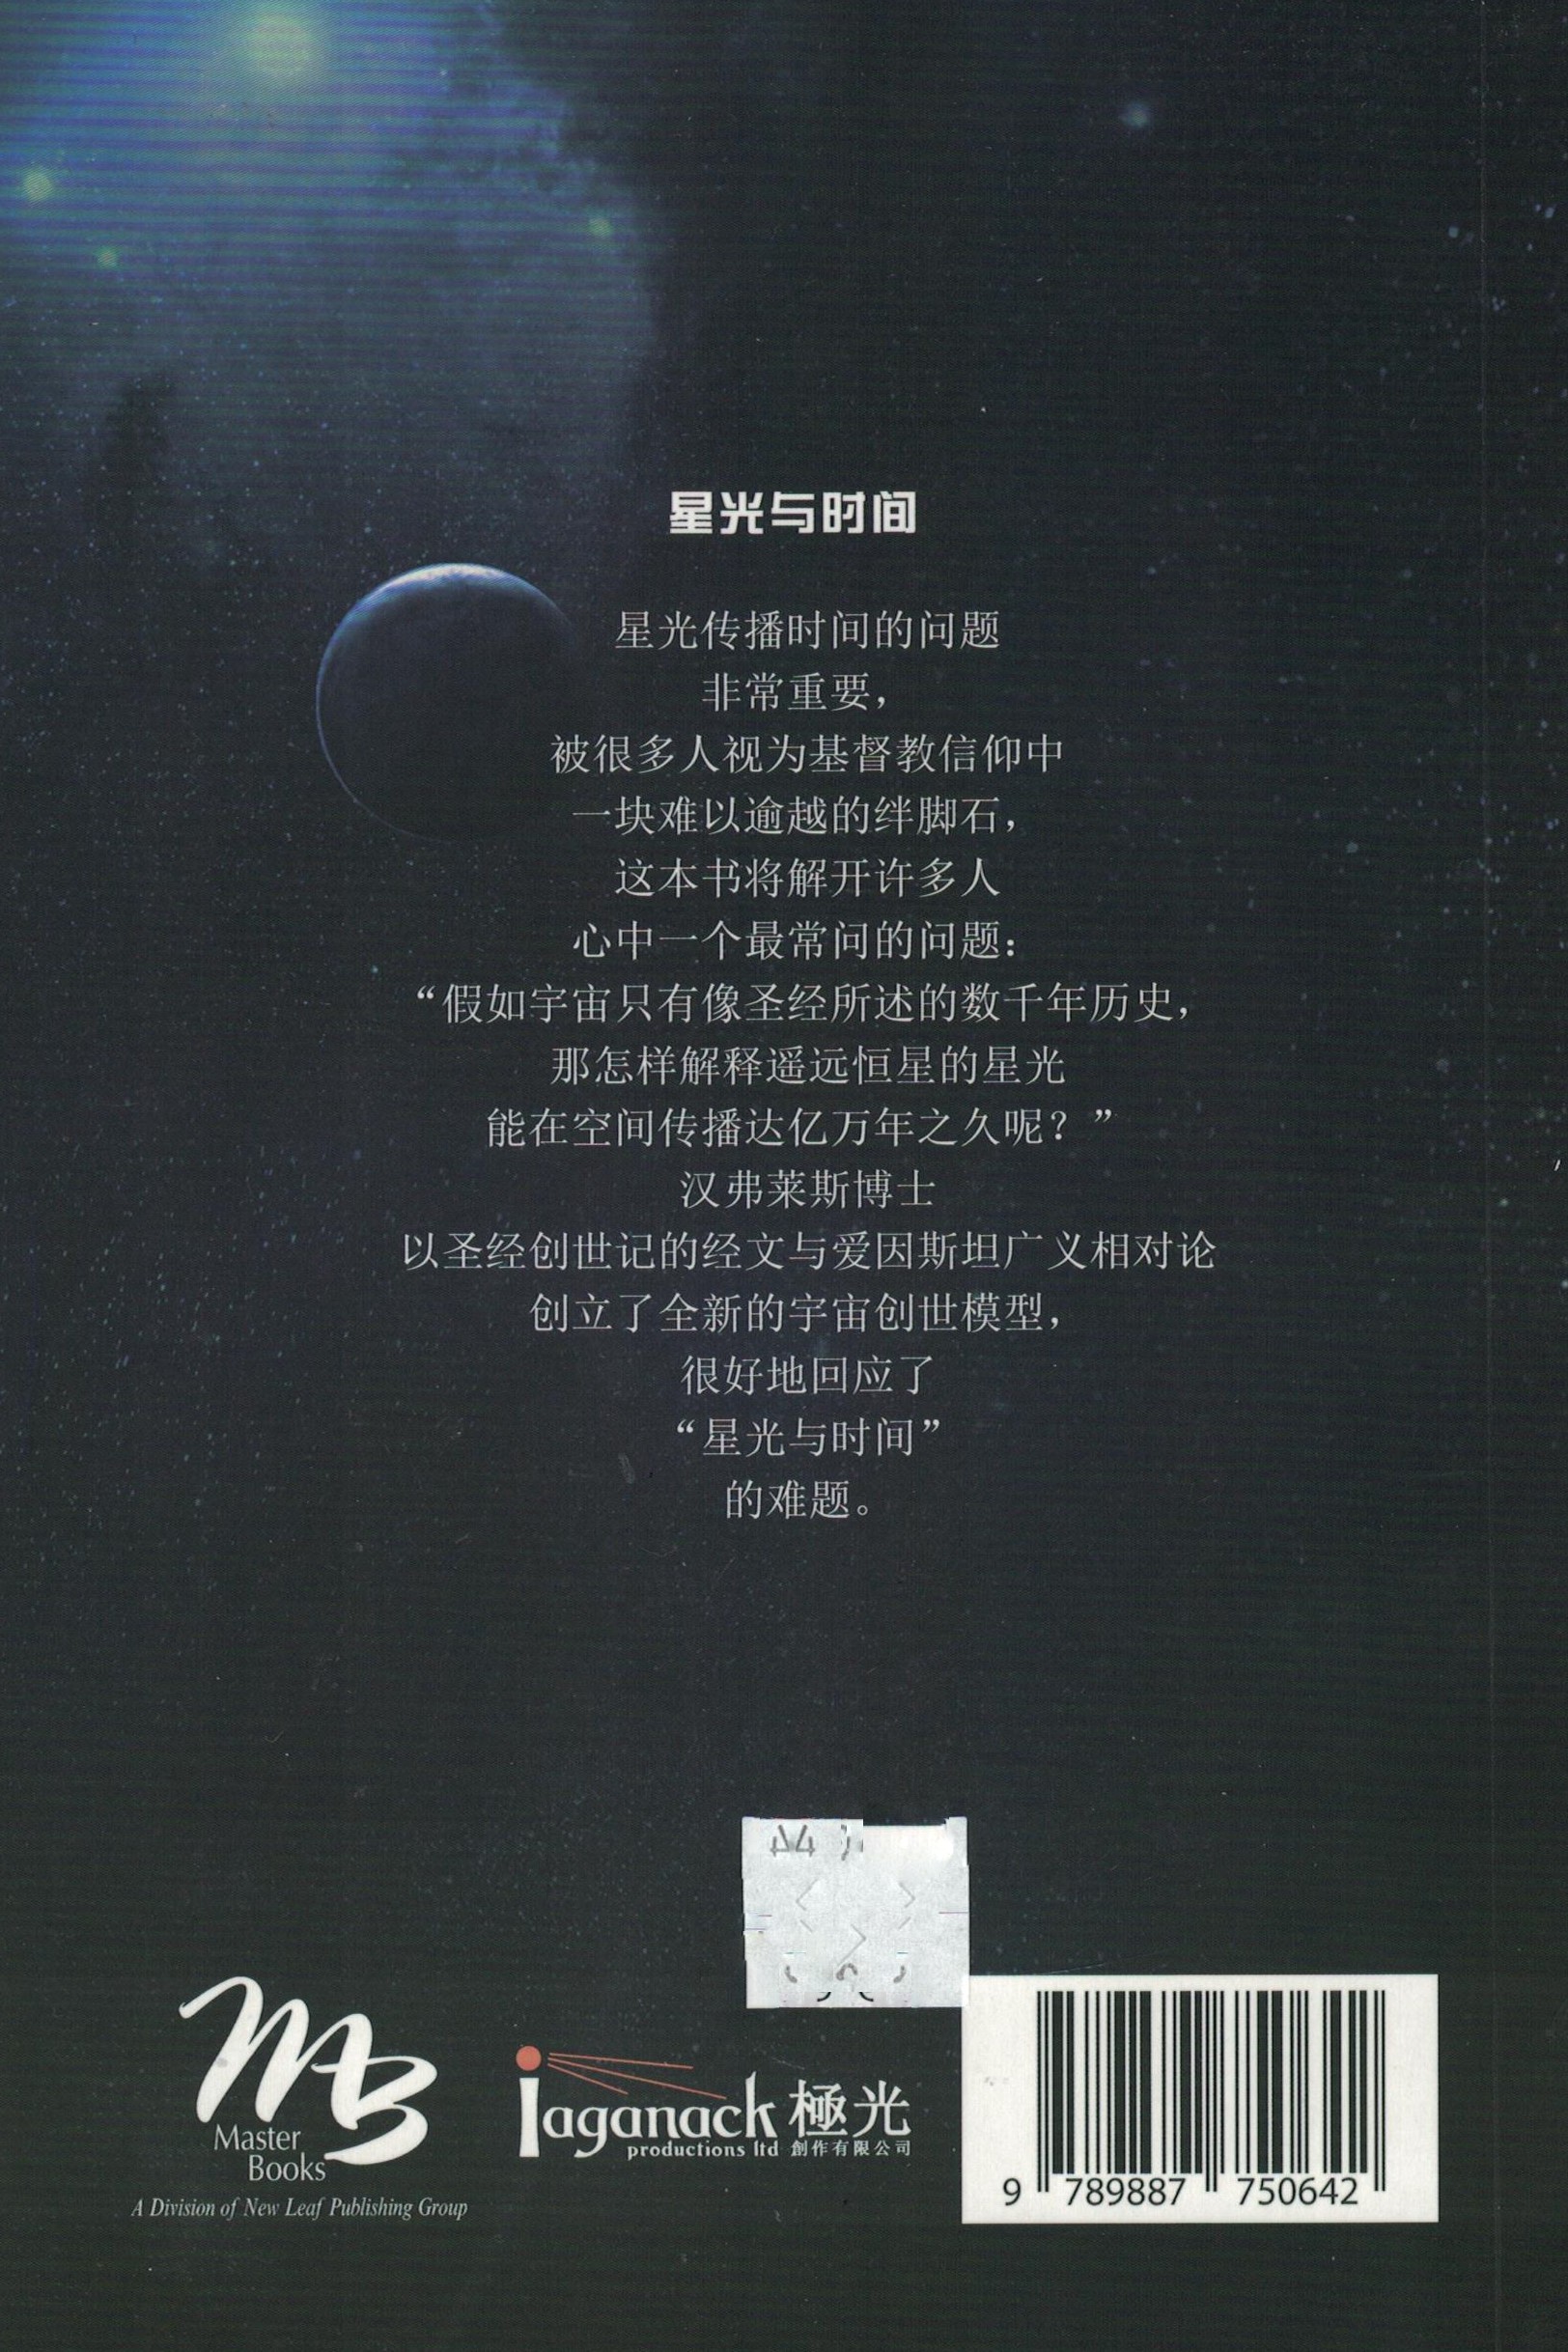 C2-46 back cover